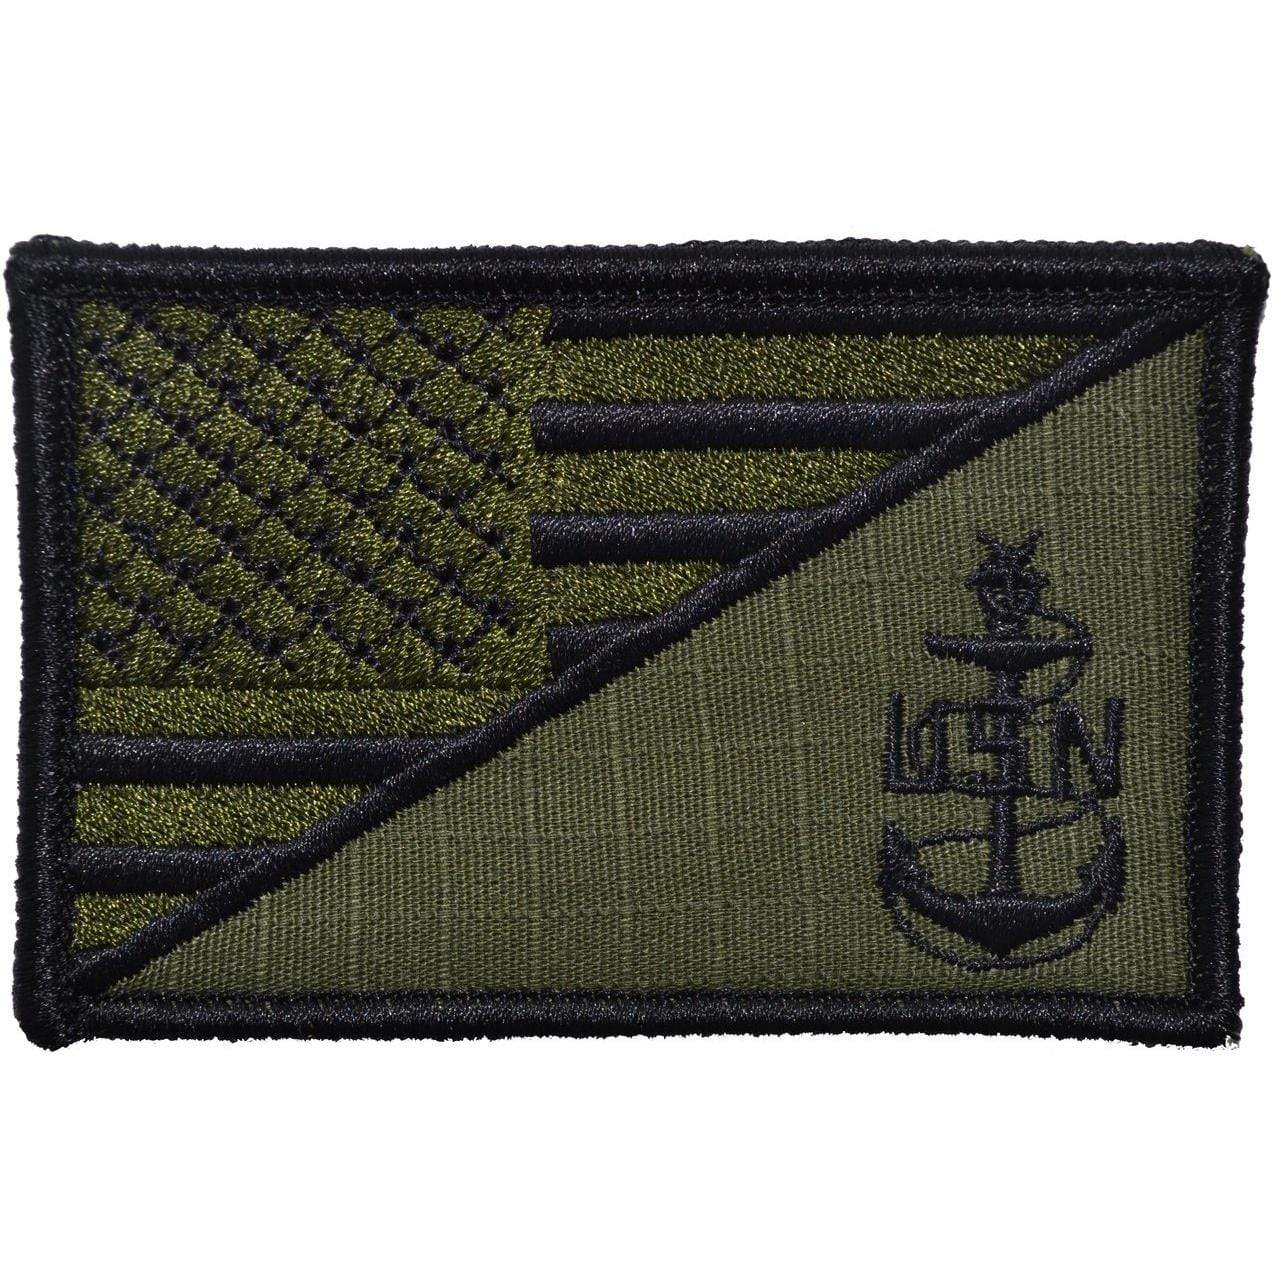 Tactical Gear Junkie Patches Olive Drab Navy SCPO Senior Chief Petty Officer USA Flag - 2.25x3.5 Patch